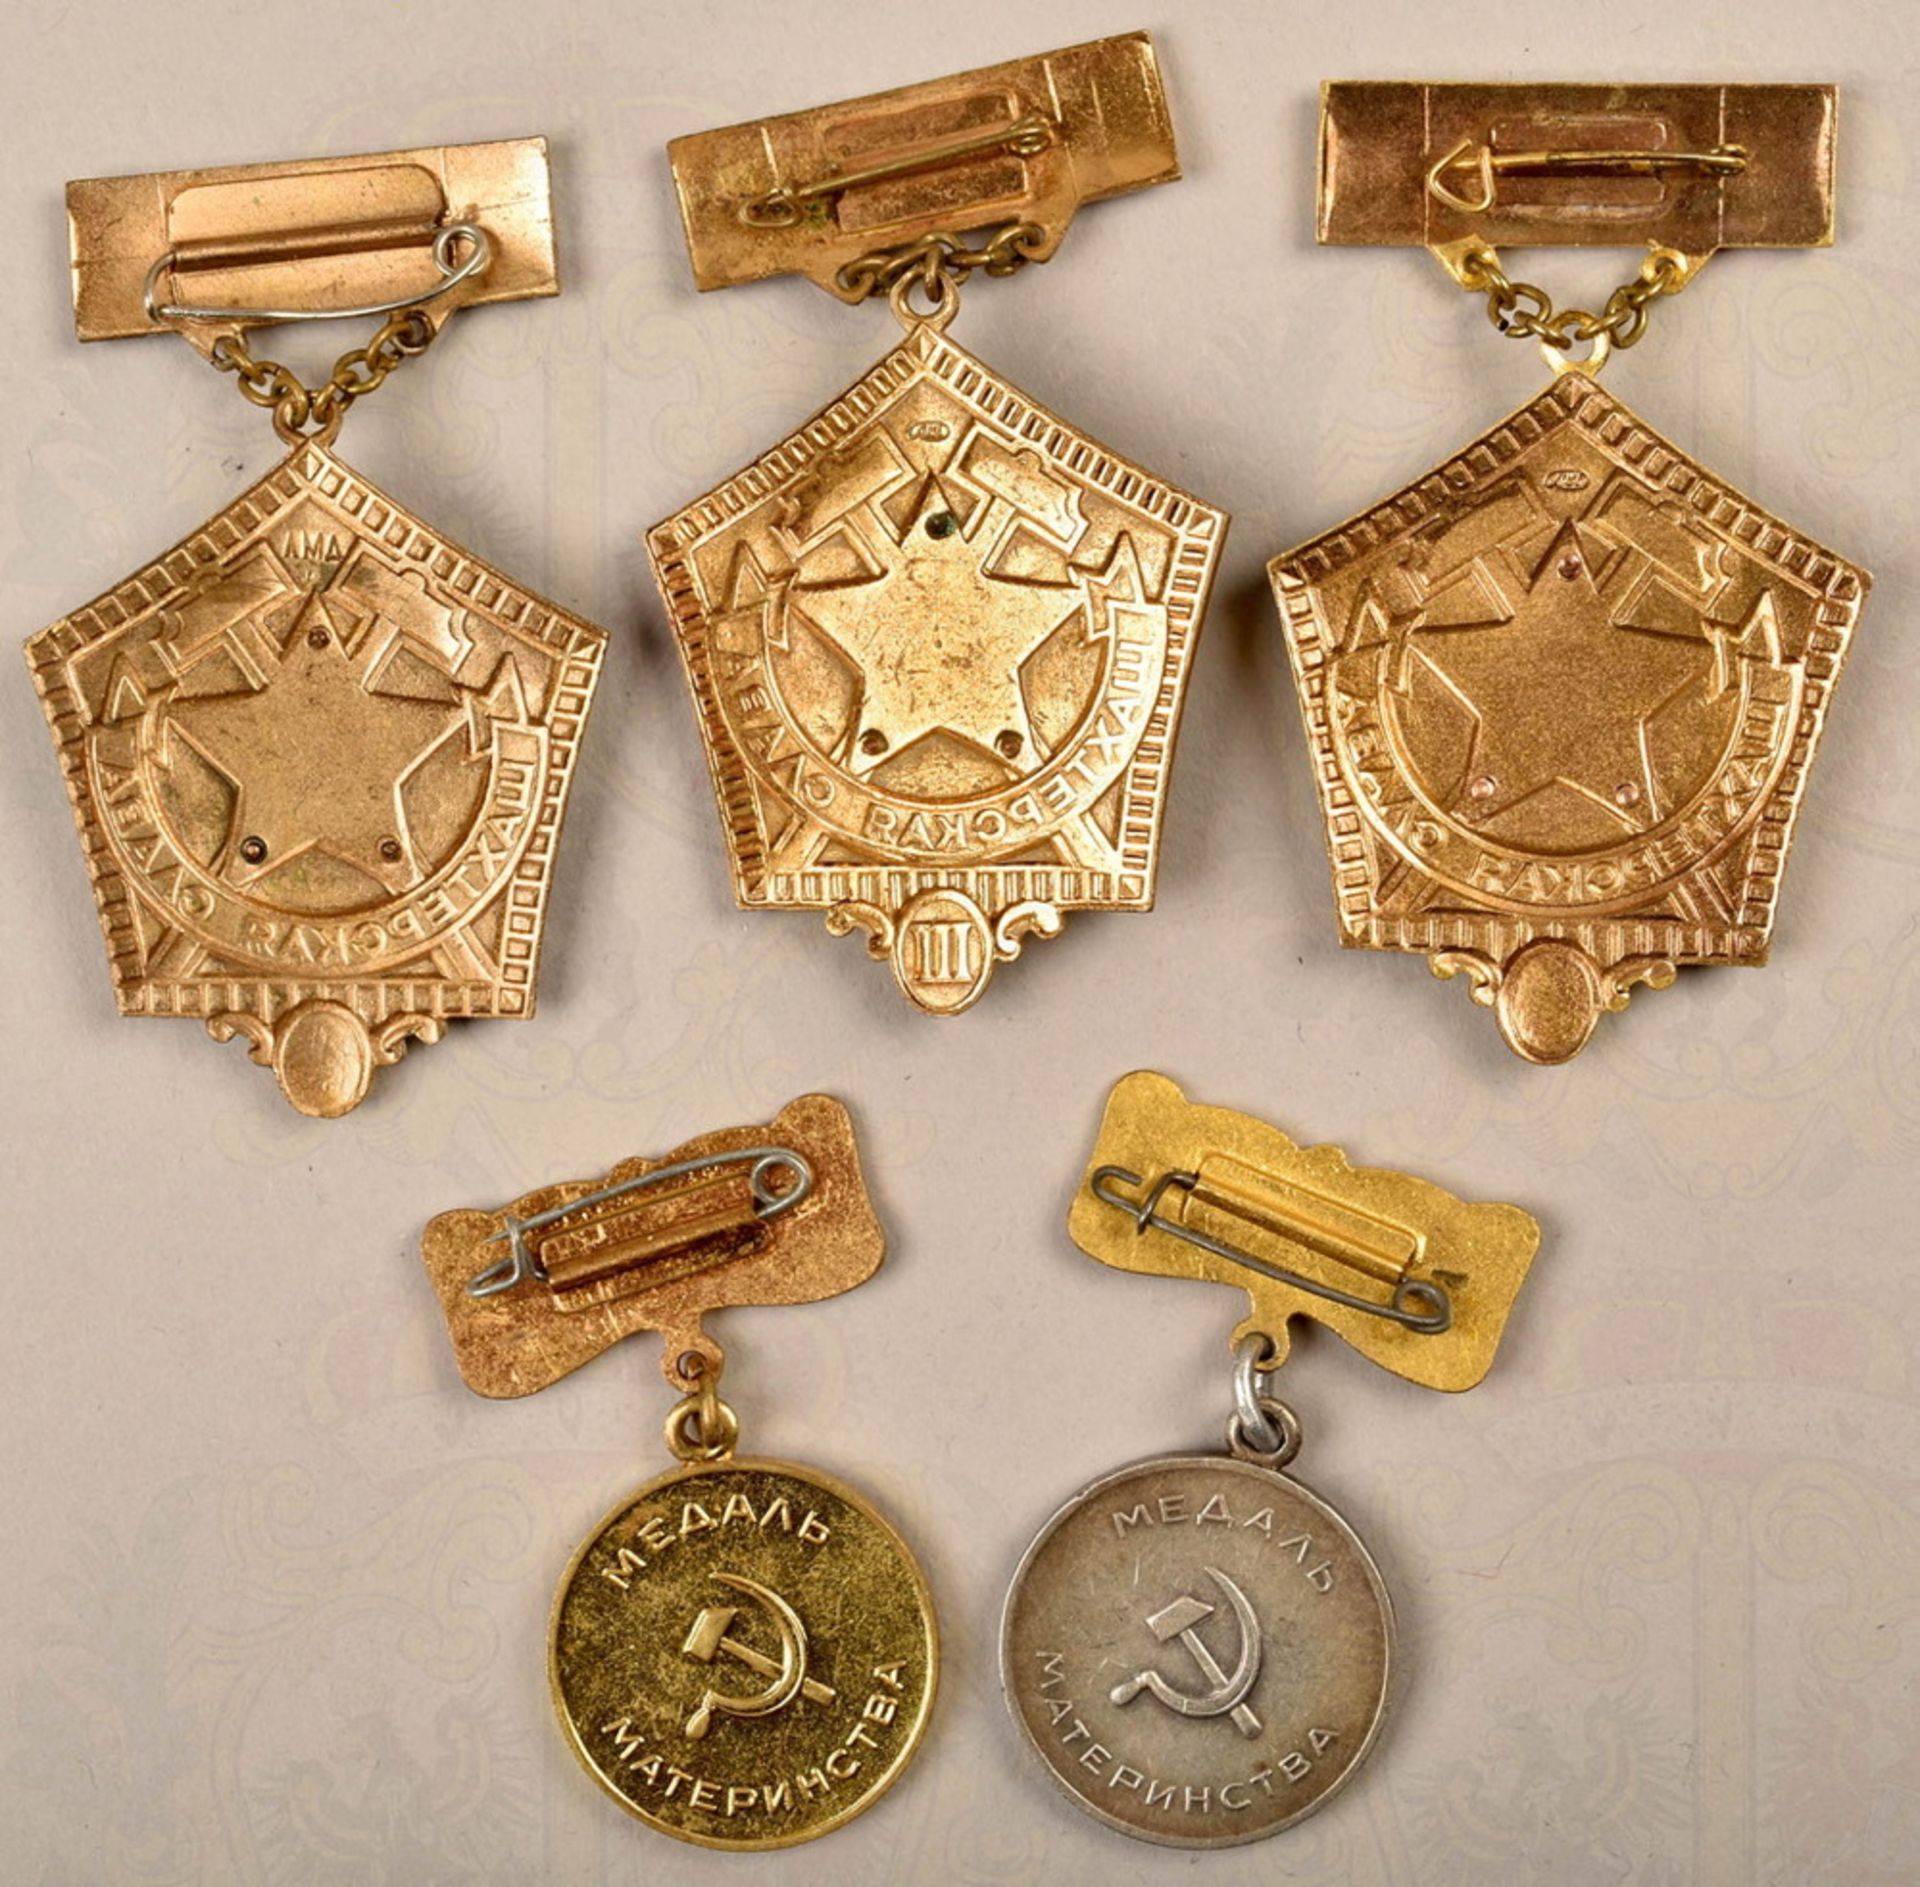 5 Soviet awards incl. set of 3 medals for miners - Image 2 of 2